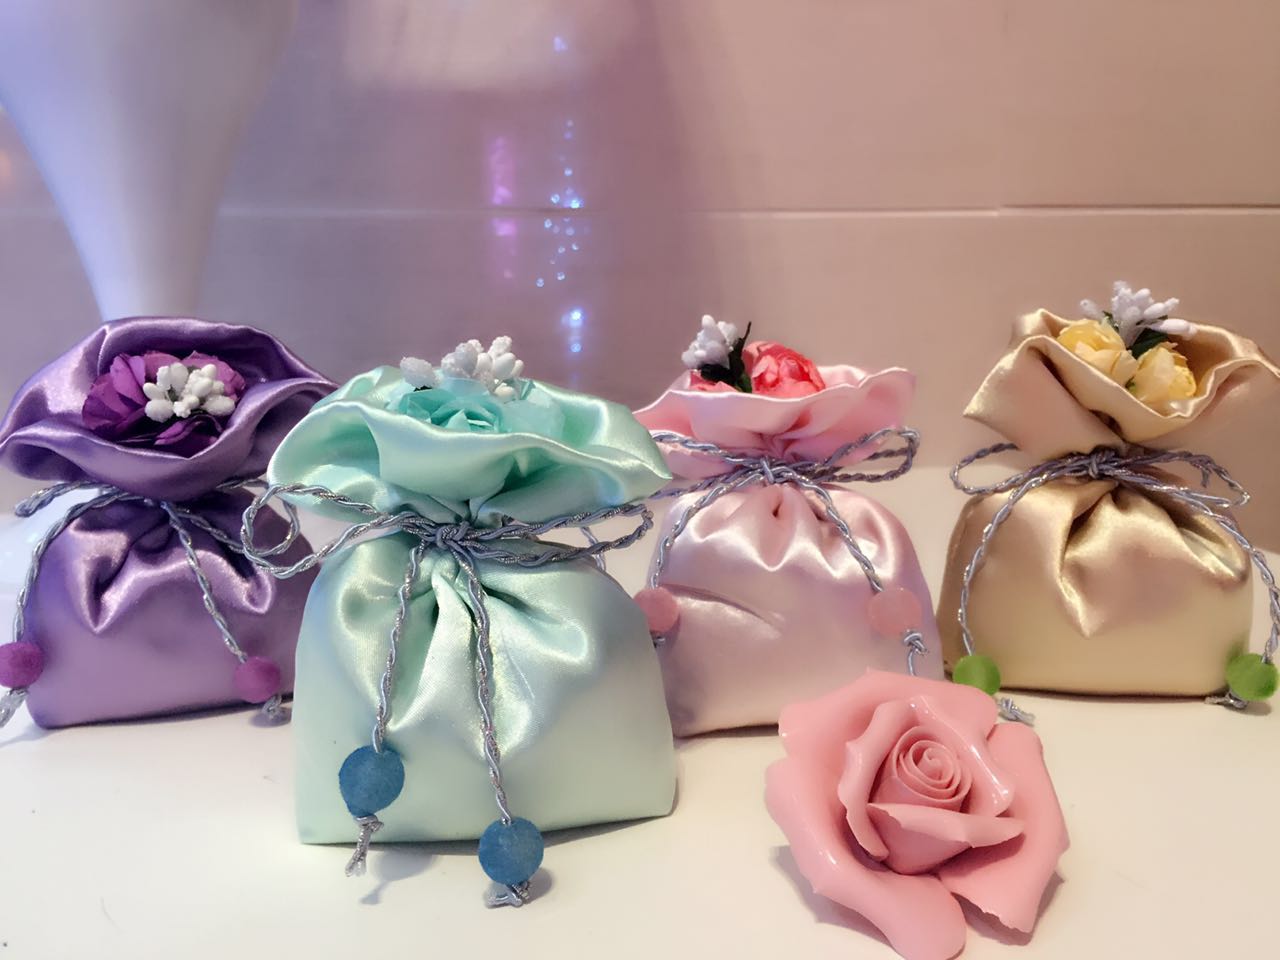 A family of aromatherapy manufacturers selling satin bow aromatherapy aromatherapy Fragrance Sachet bag bag: hyacinth violet Paris spring sky Caixia welcomed the crowd6